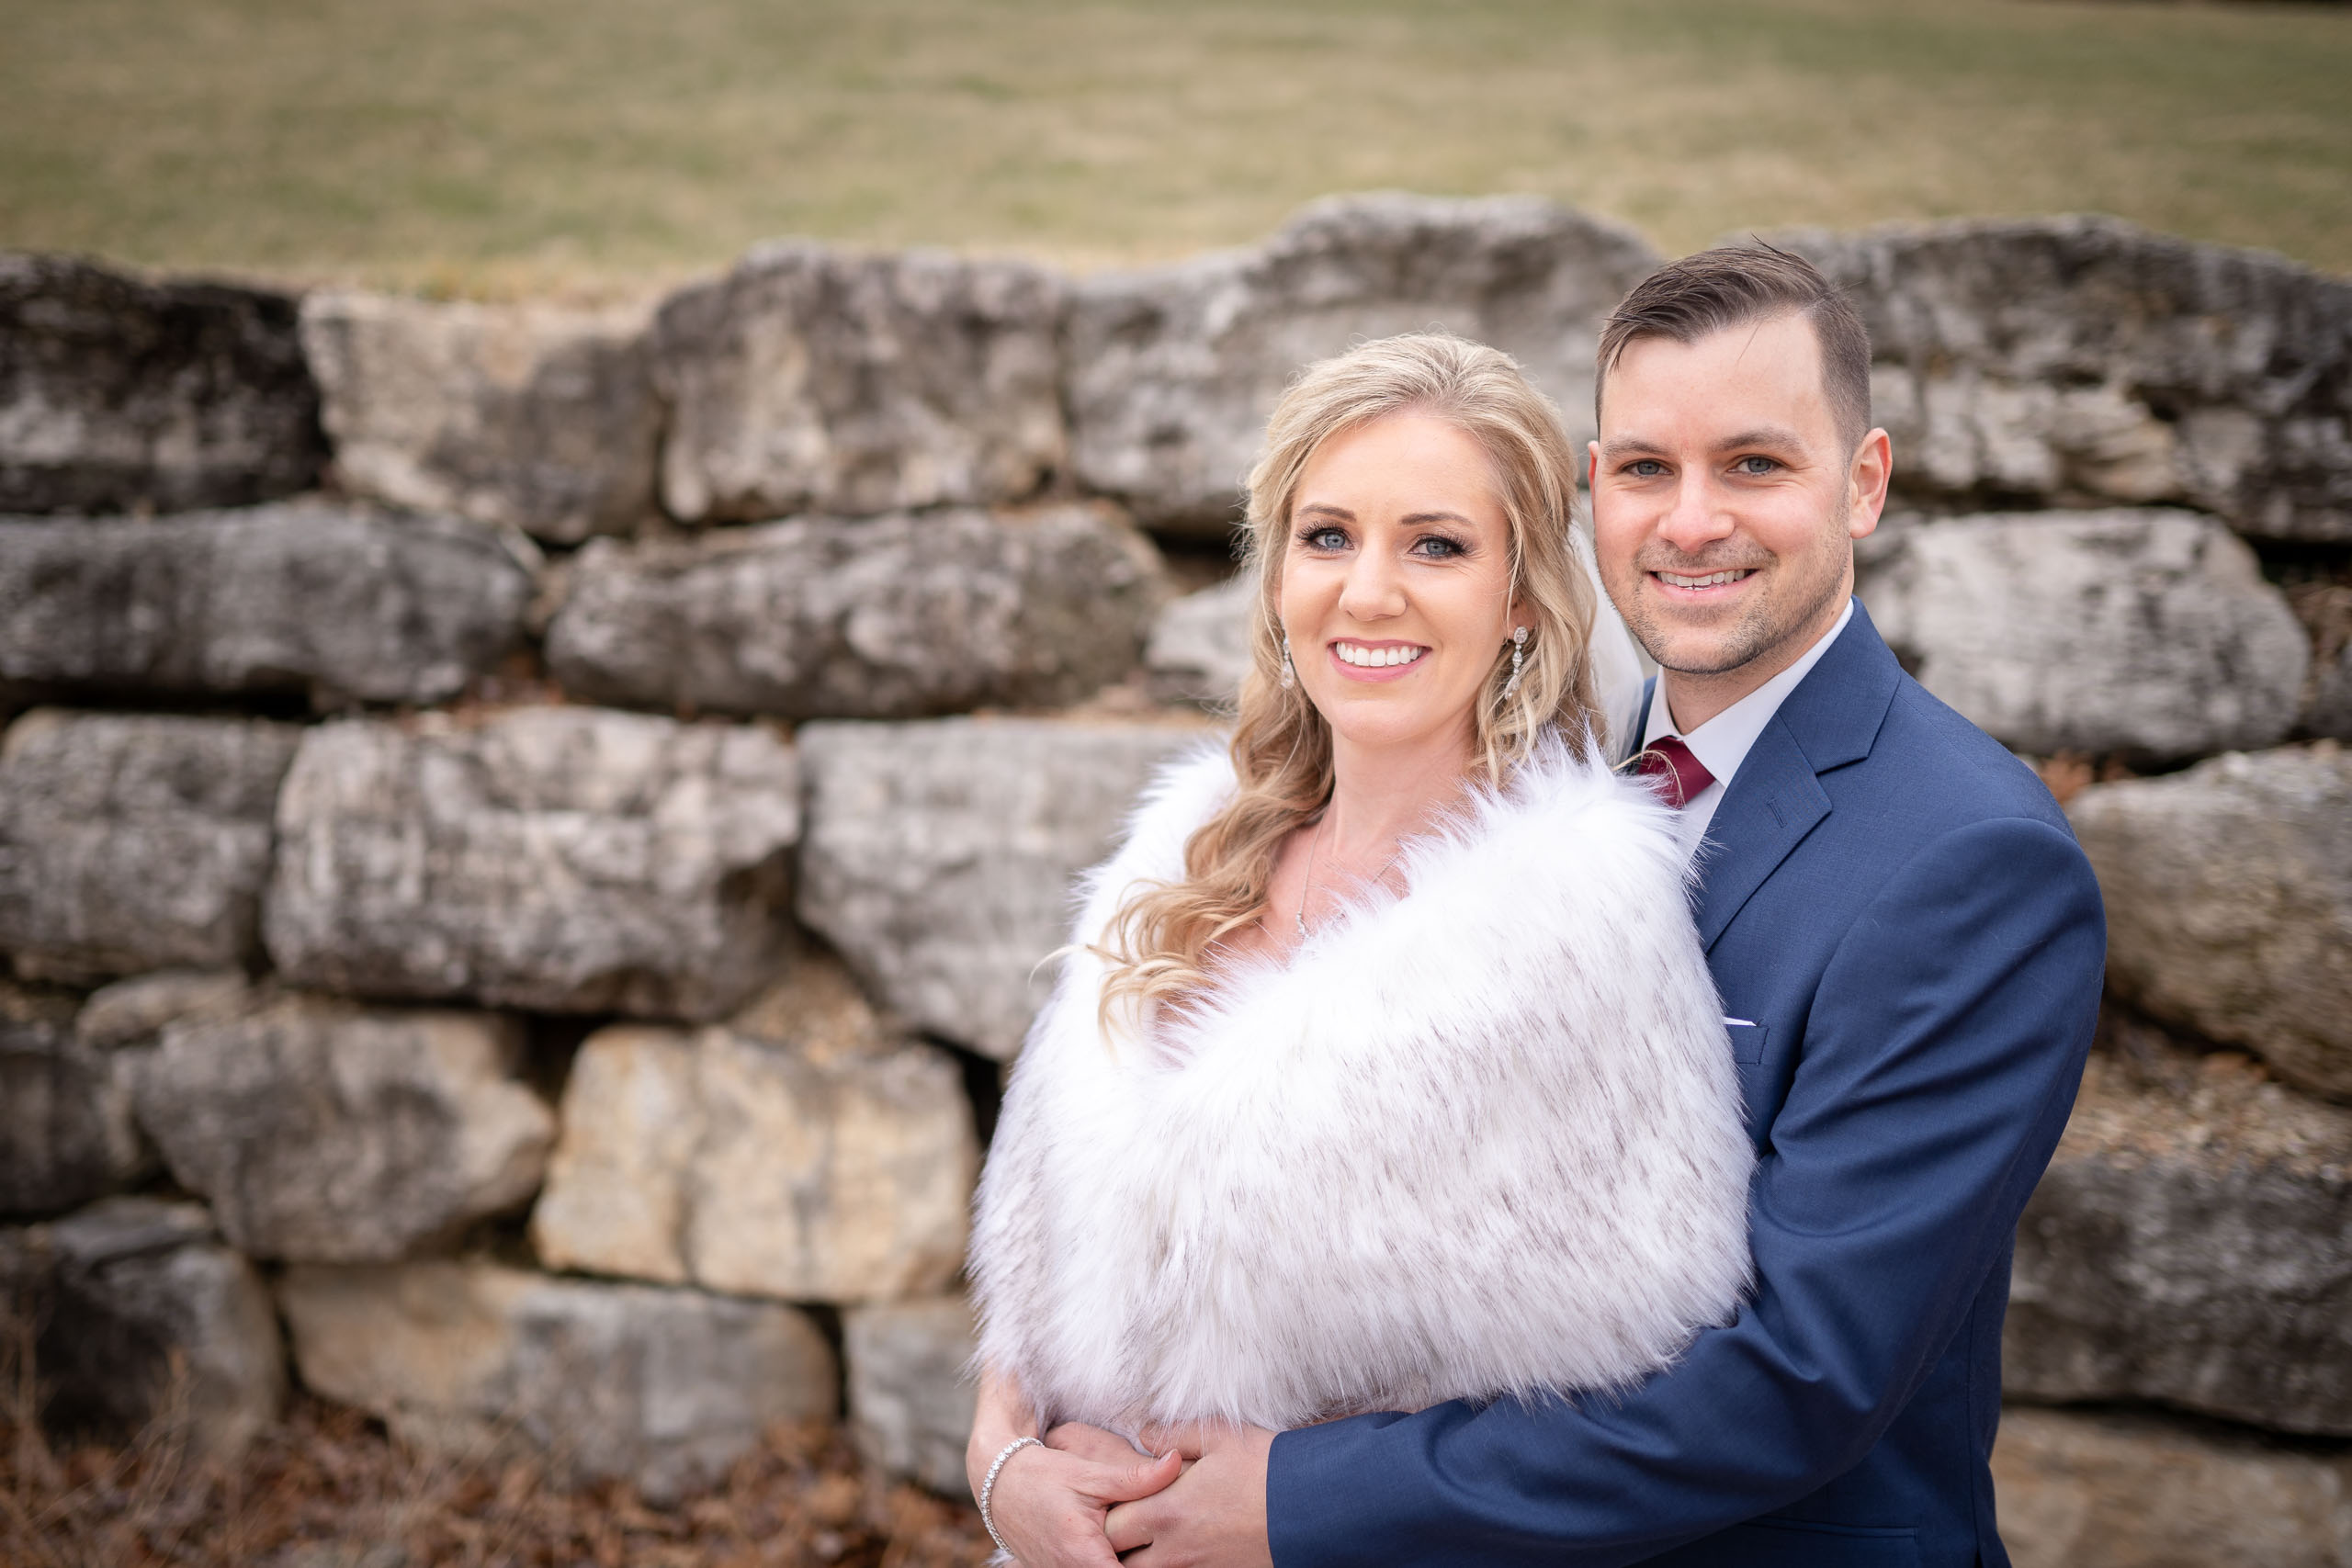 winter wedding ideas at the lake of the ozarks